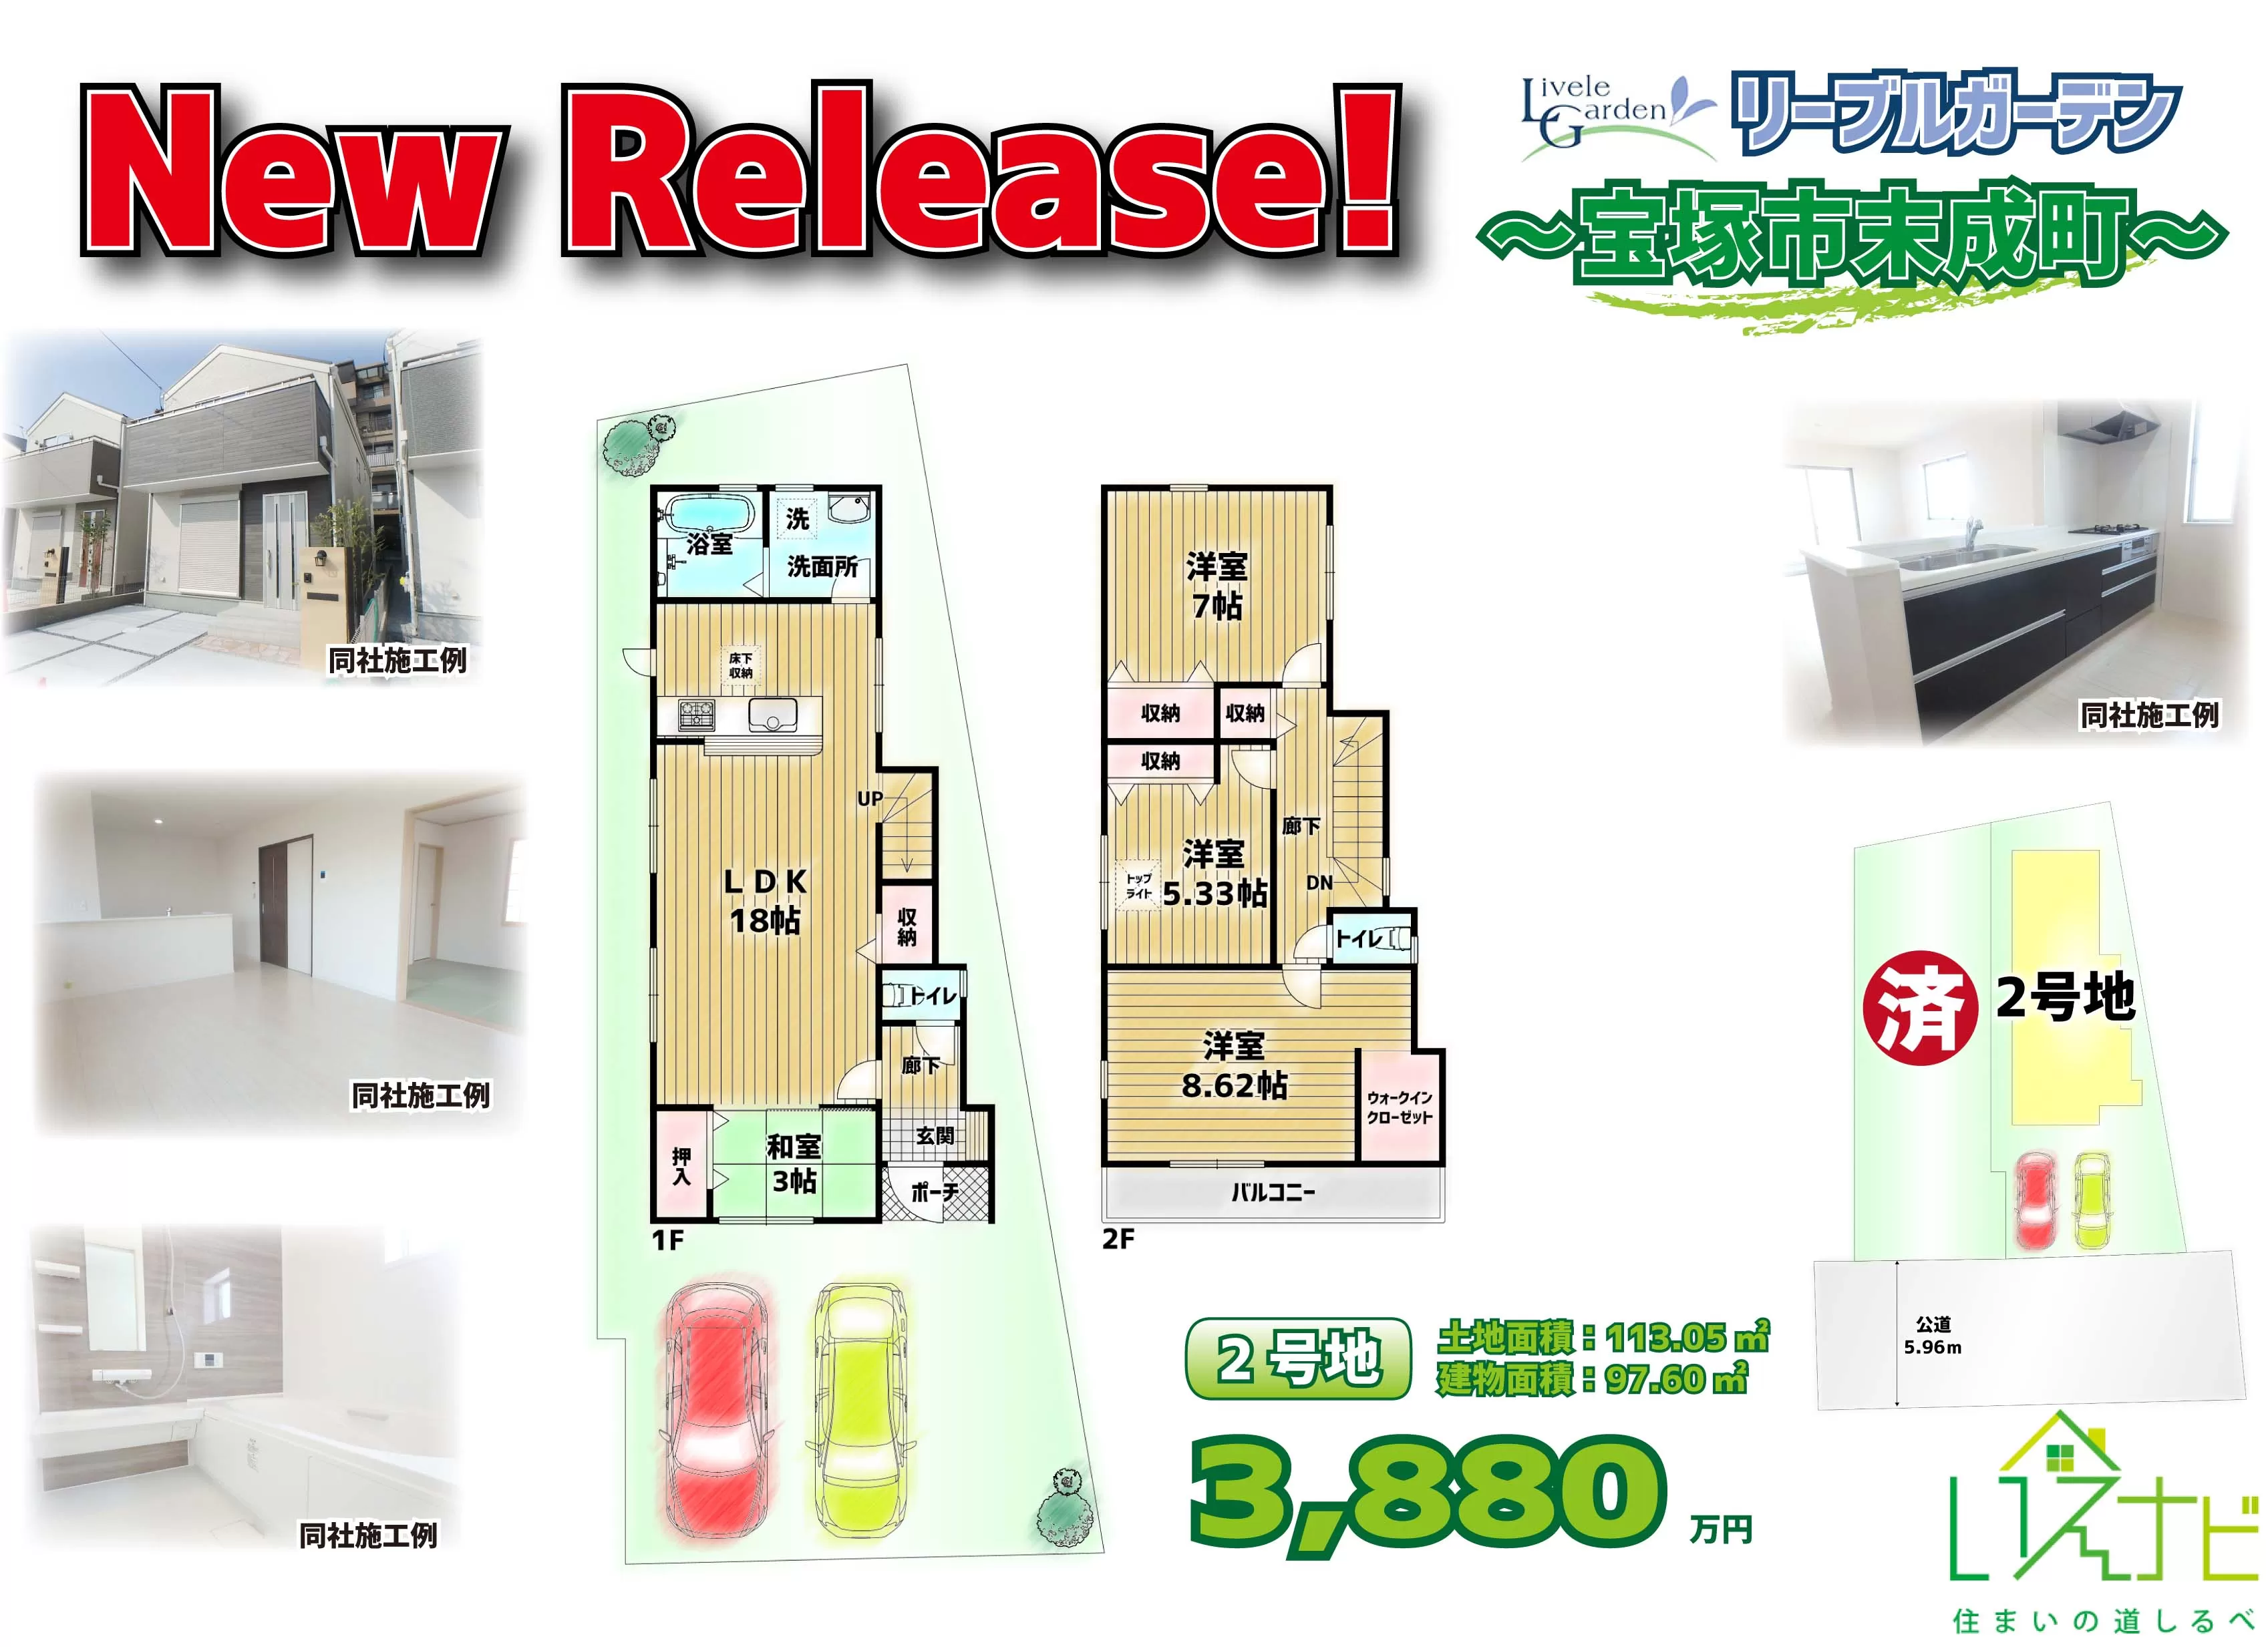 New Release ～リーブルガーデン宝塚市末成町～